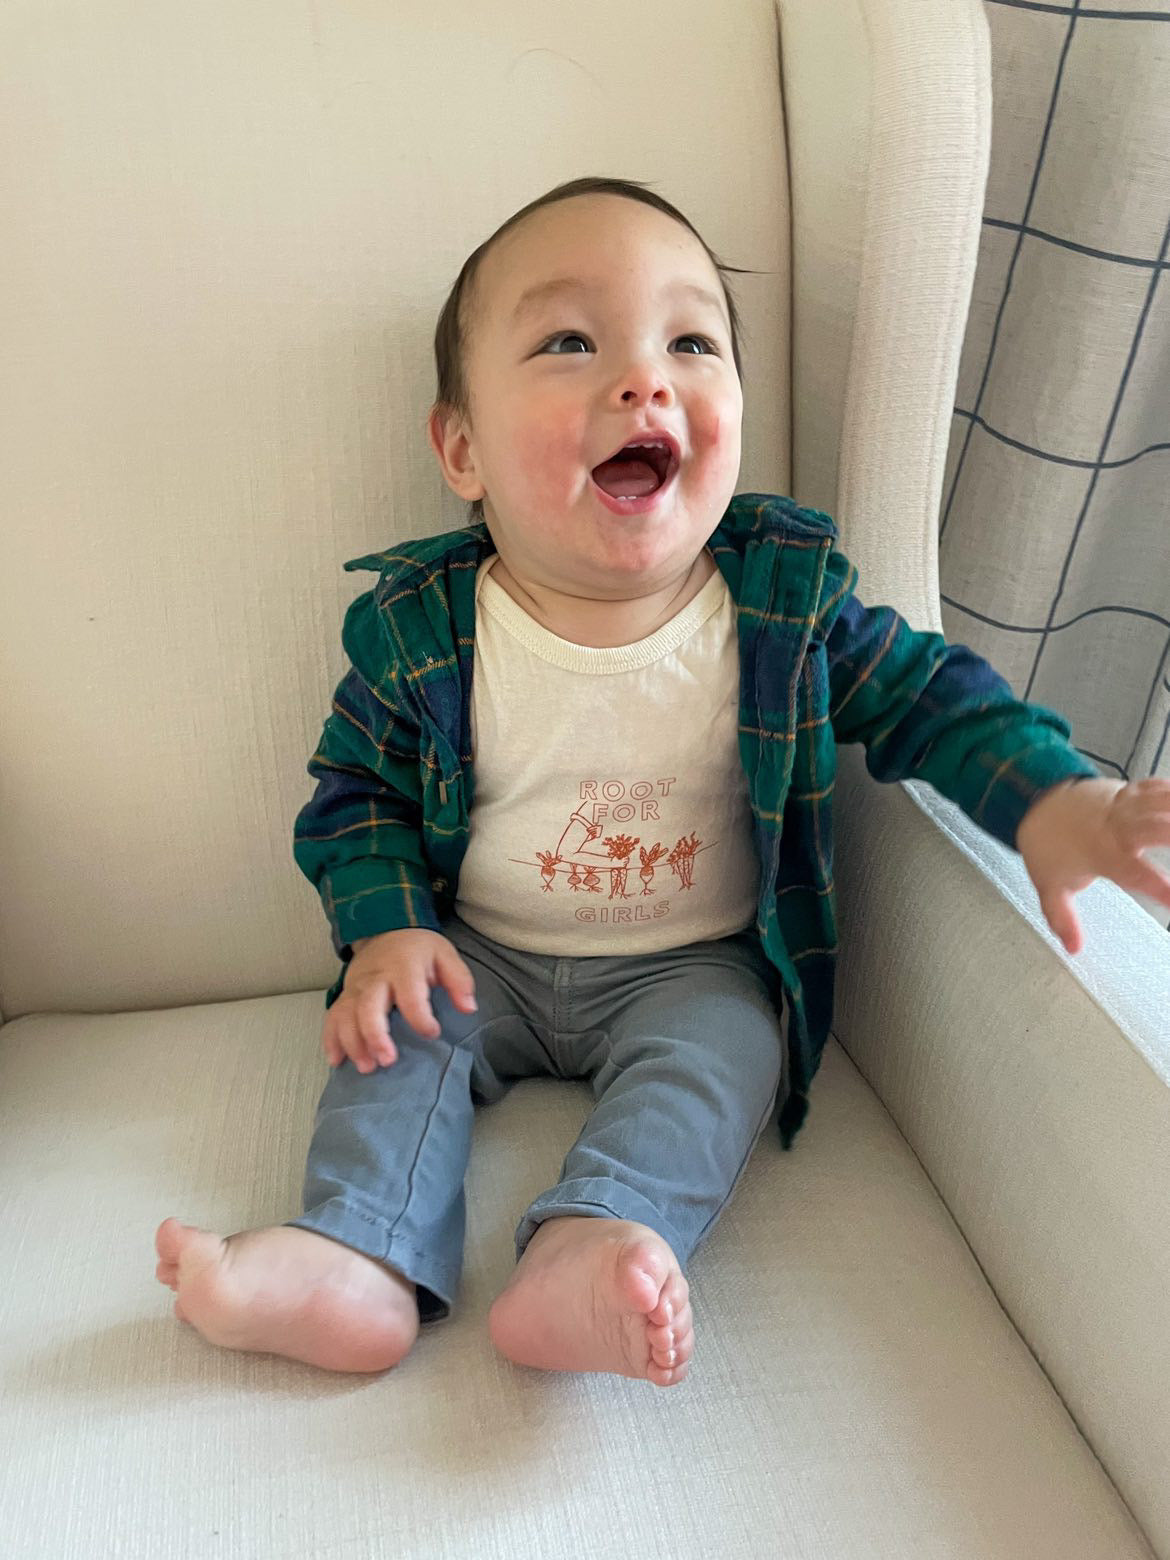 A baby laughs wearing a natural color onesie with the words "Root for Women" and a flannel shirt